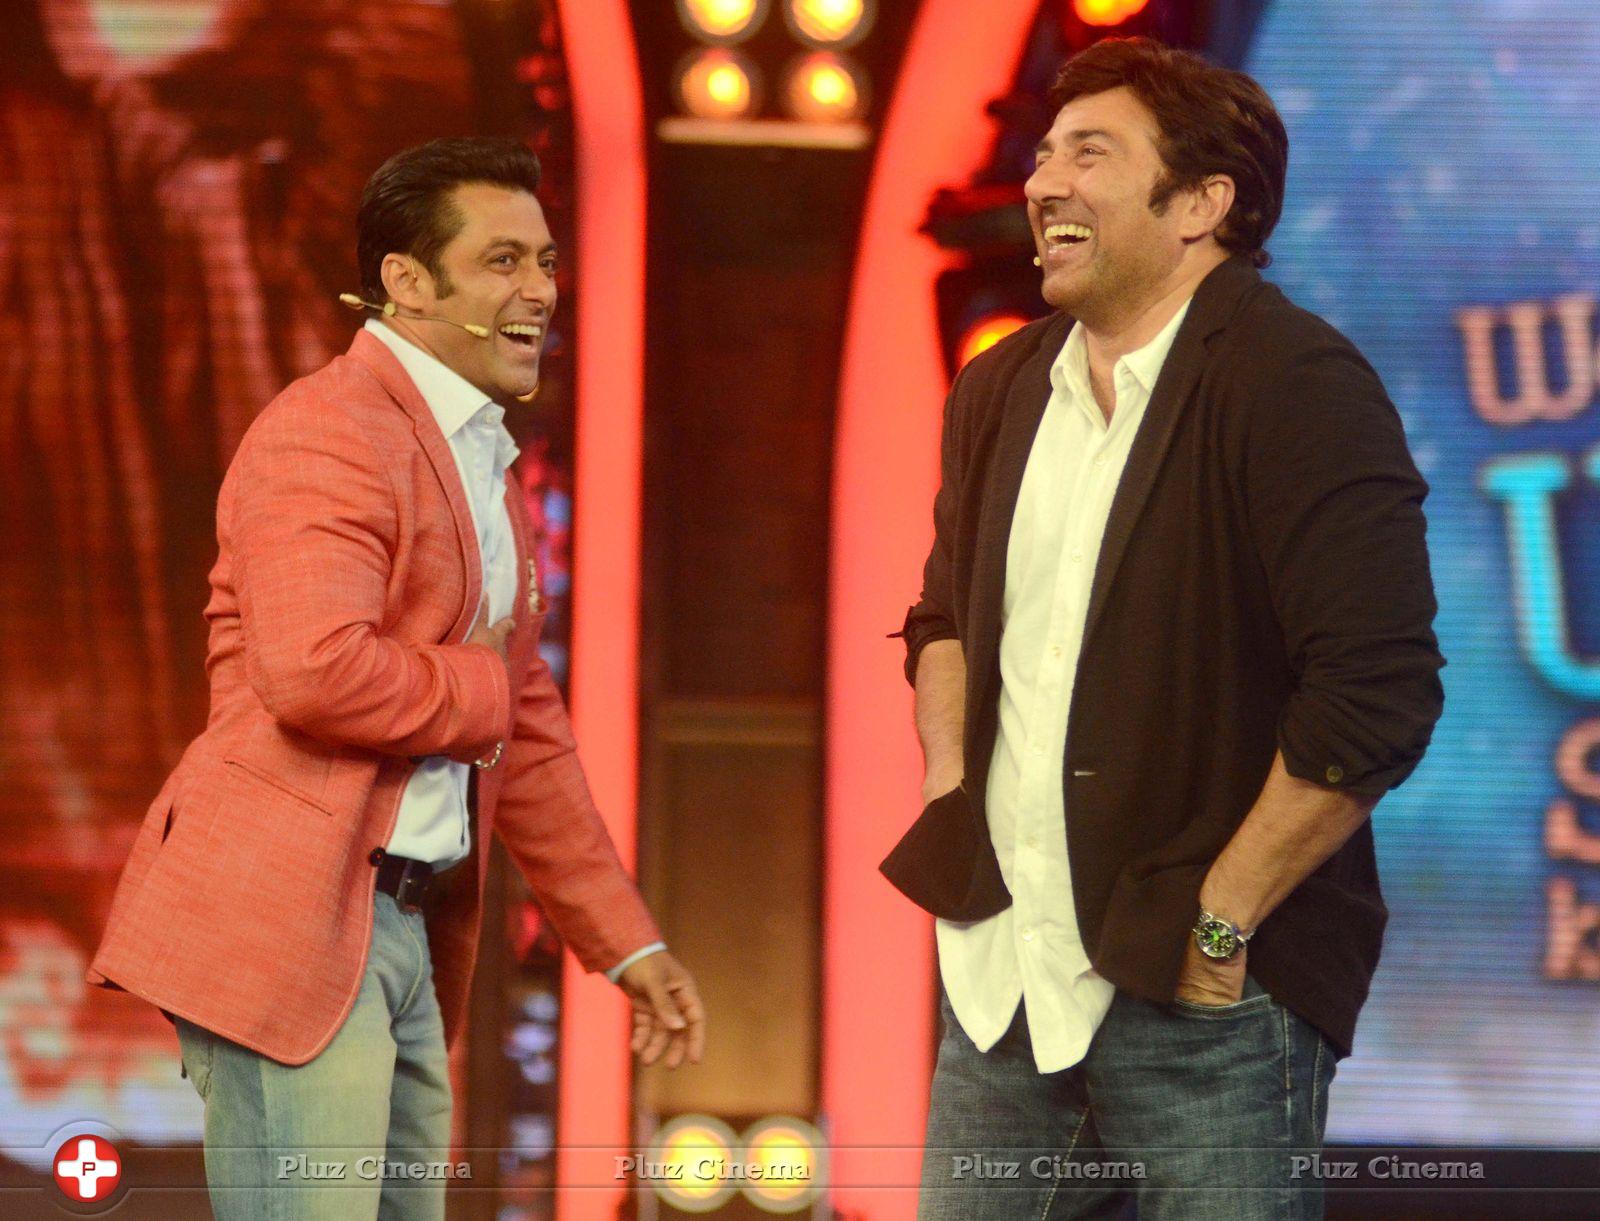 Sunny Deol promotes his film Singh Sahab The Great on the sets of Big Boss With Salman Khan Photos | Picture 633398